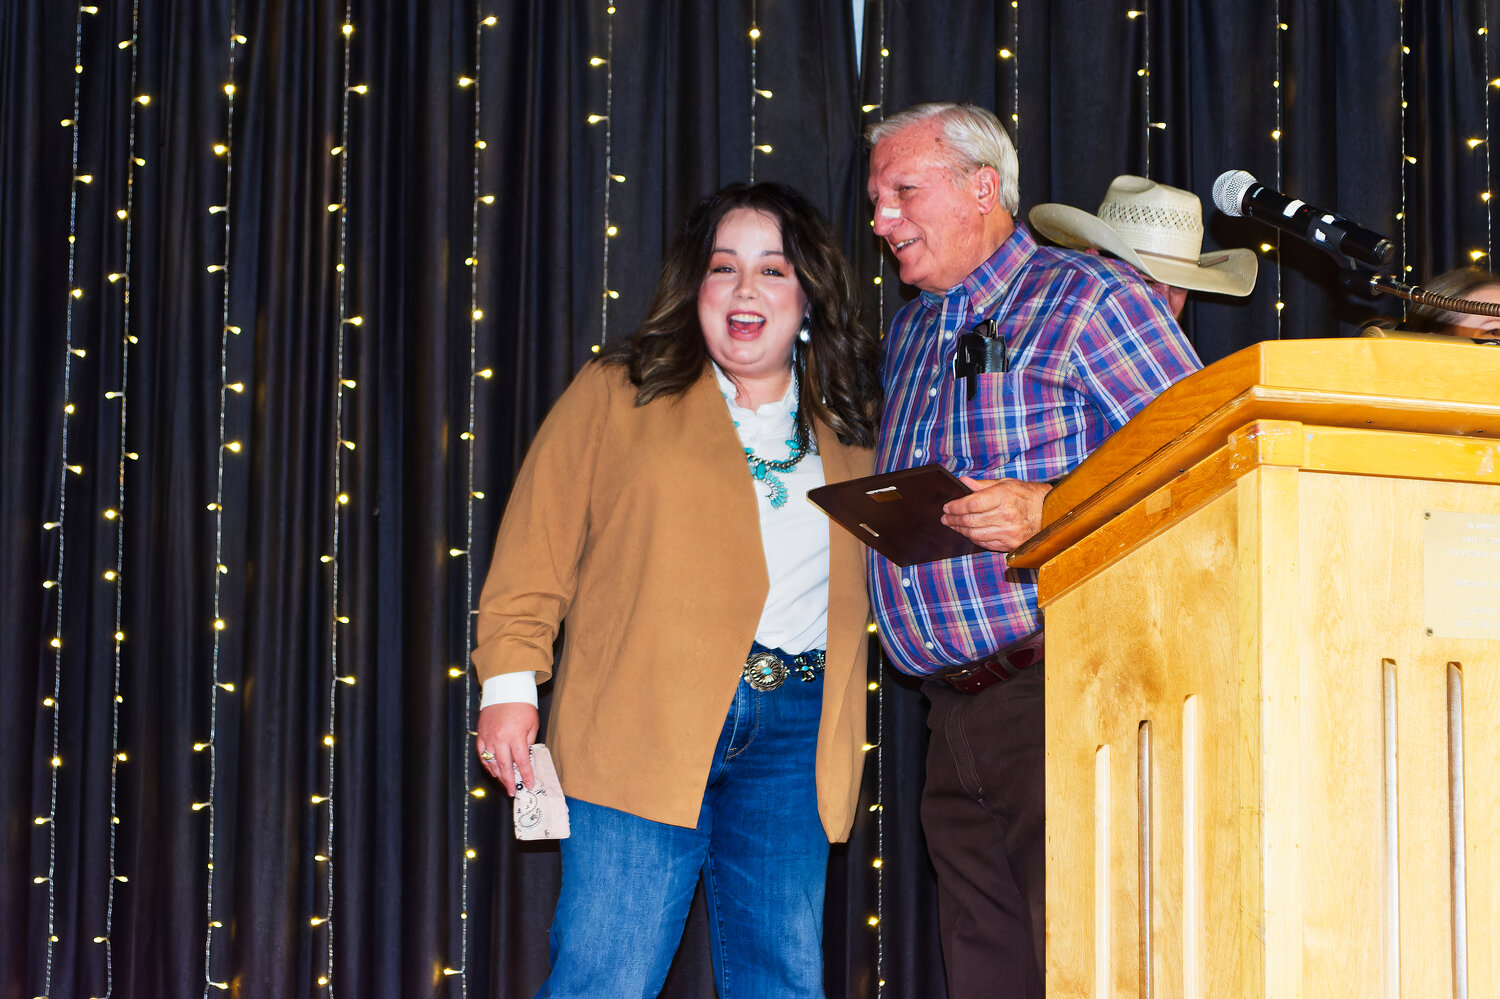 Jackie Rodieck congratulates Glen Dossett on his induction into the Agriculture Teachers of Texas Association’s hall of fame.